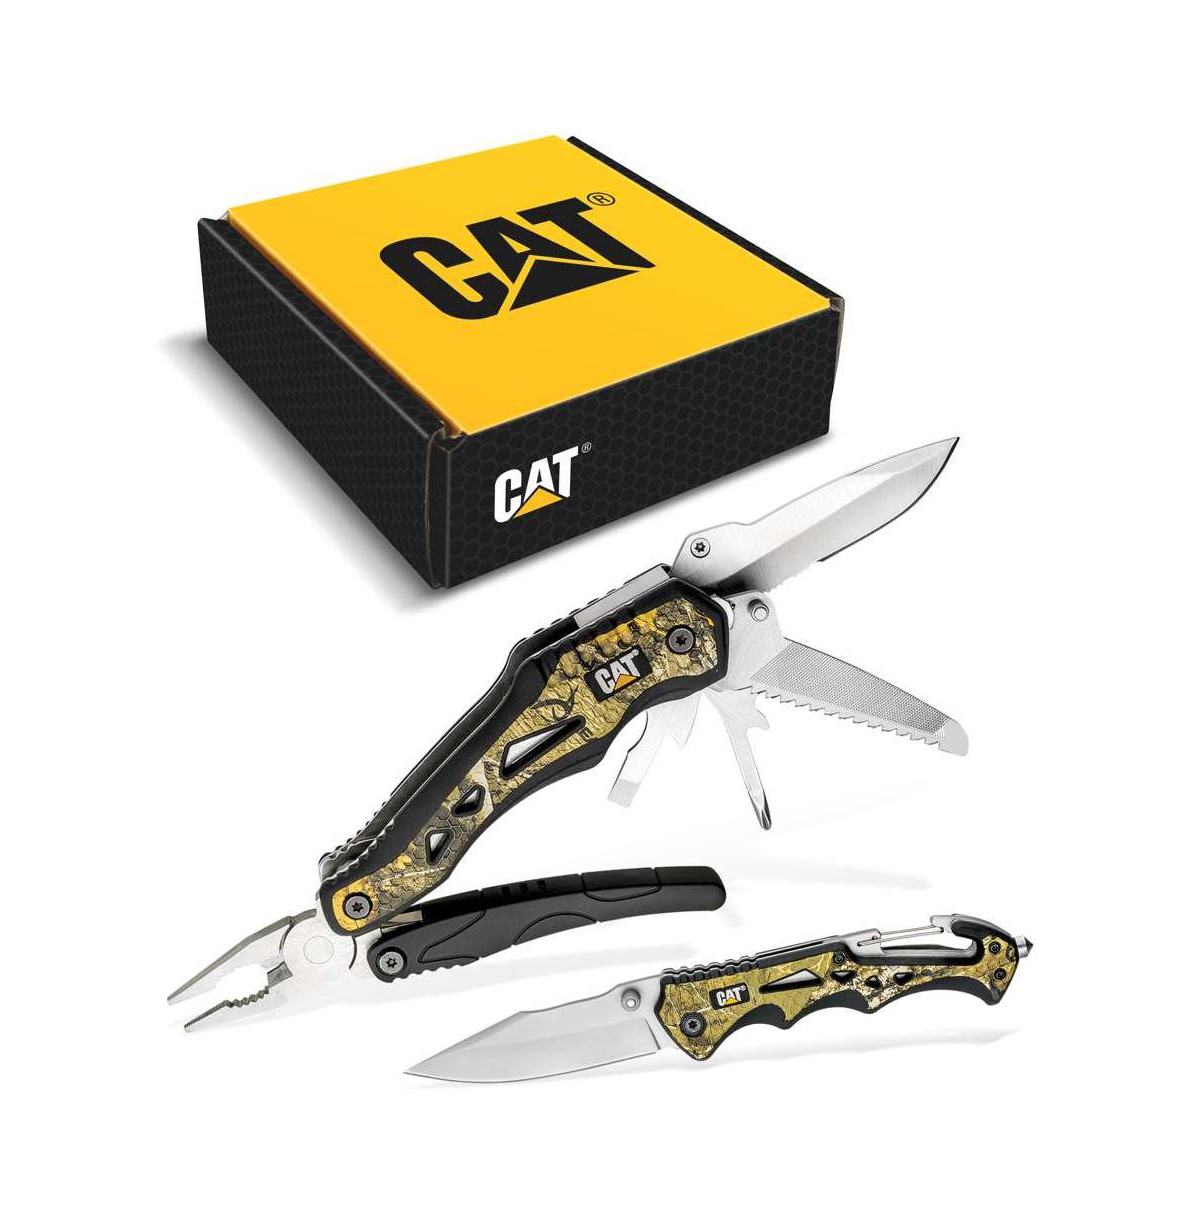 2 Piece Multi-Tool and Knife Gift Box Set with Real Tree Camo